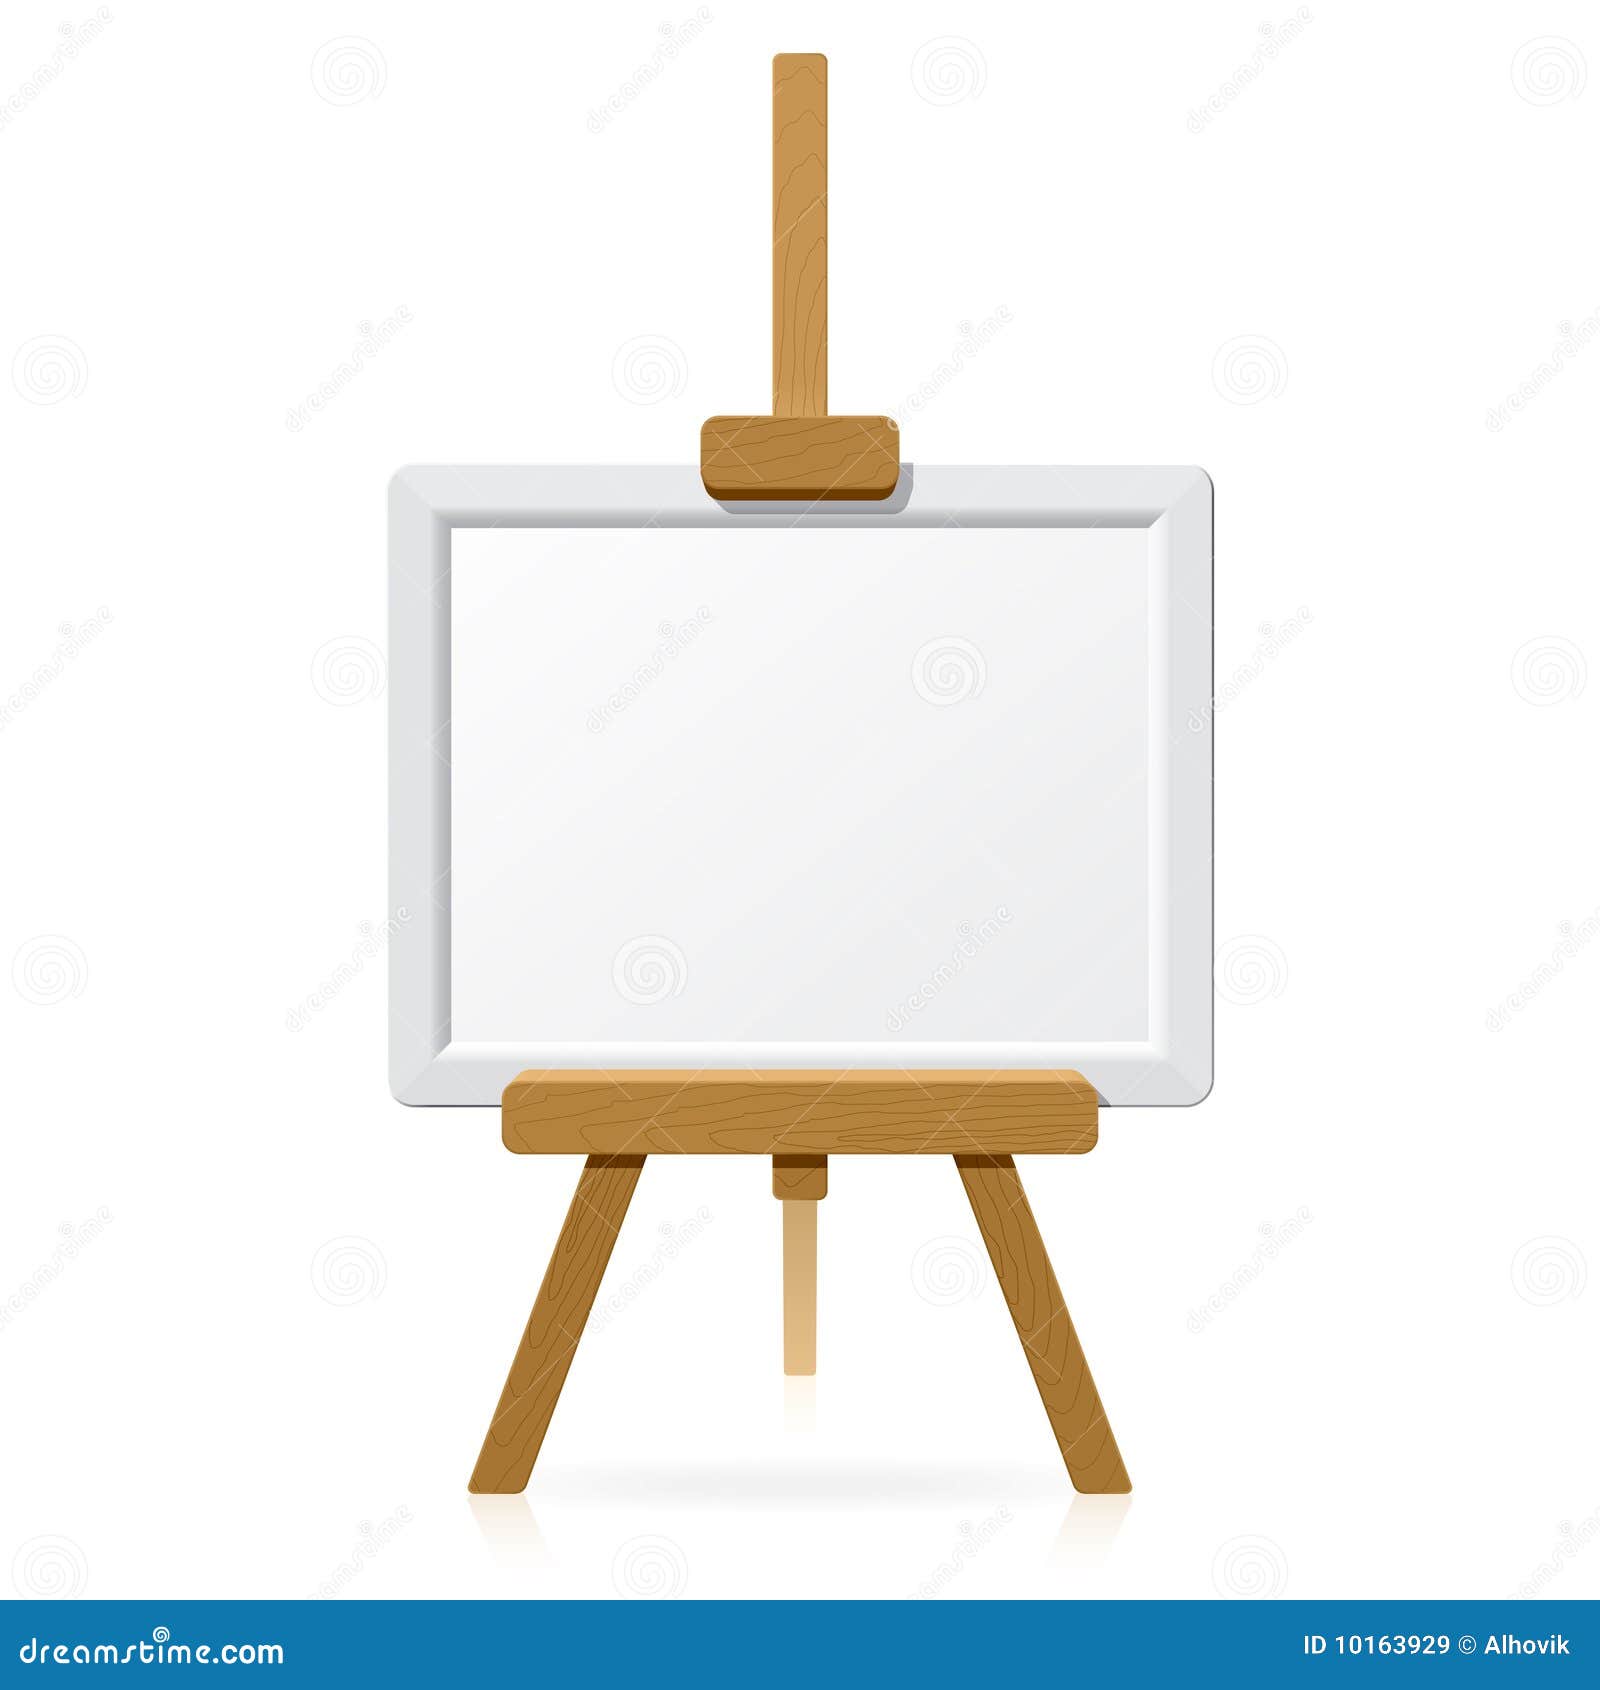 Wooden Easel With Blank Canvas Royalty Free Stock Images 